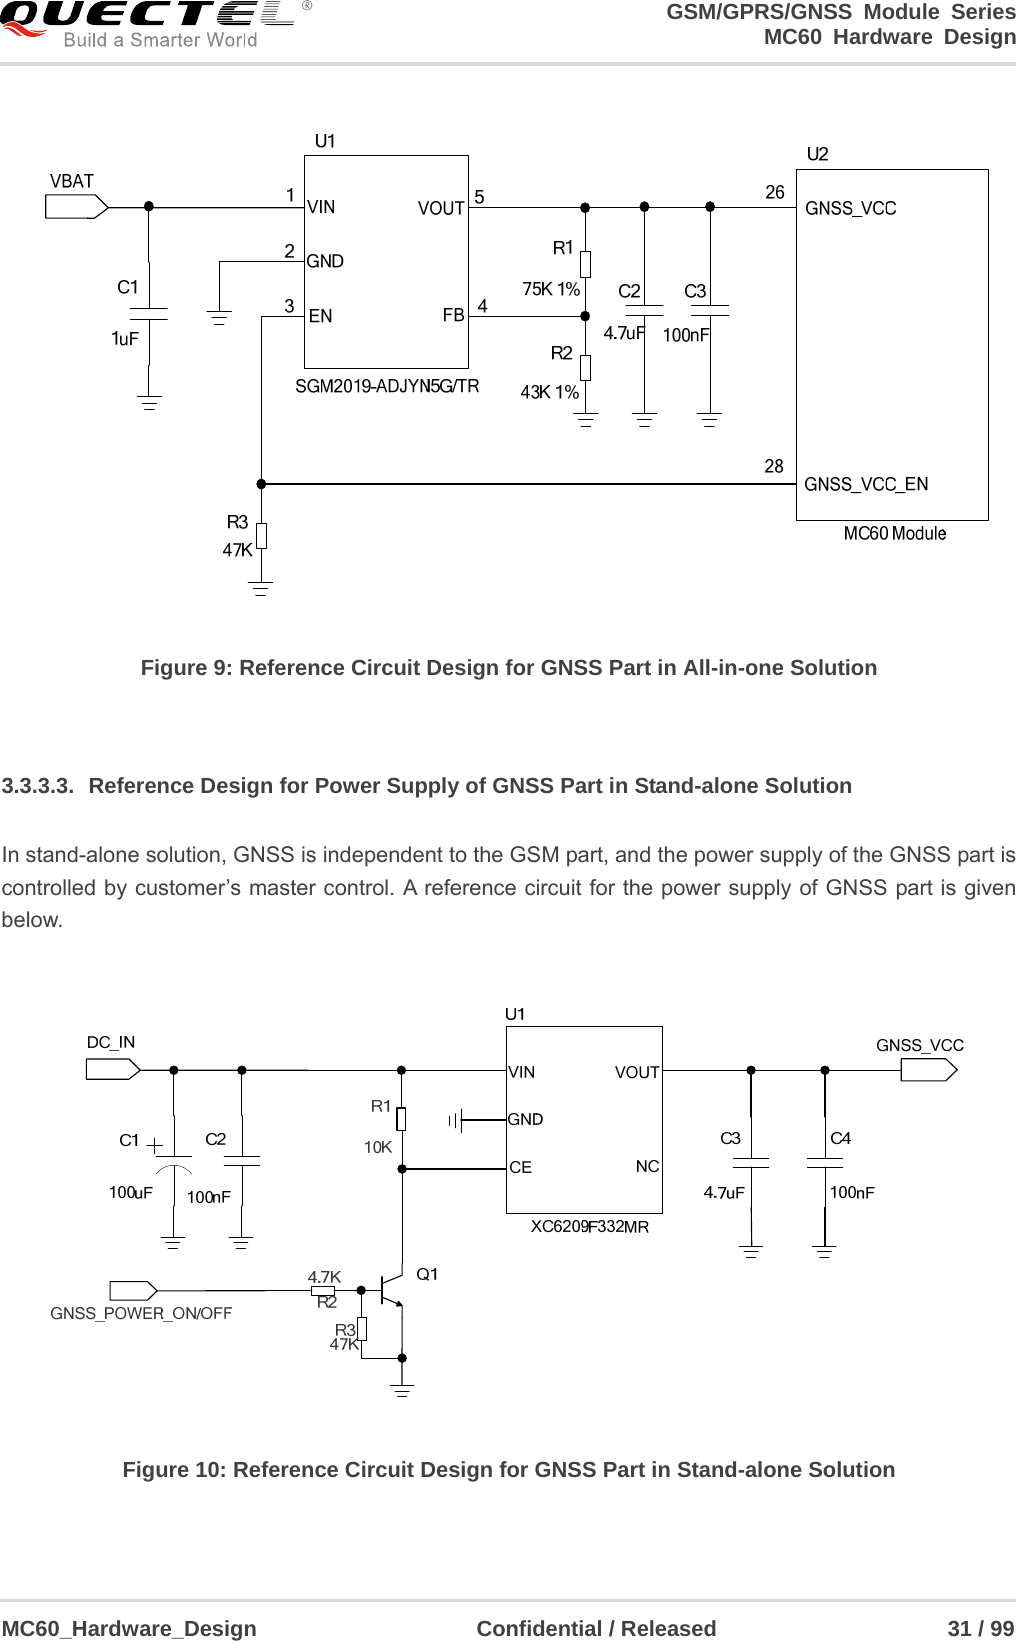                                                                     GSM/GPRS/GNSS Module Series                                                                 MC60 Hardware Design  MC60_Hardware_Design                    Confidential / Released                     31 / 99      Figure 9: Reference Circuit Design for GNSS Part in All-in-one Solution  3.3.3.3.  Reference Design for Power Supply of GNSS Part in Stand-alone Solution In stand-alone solution, GNSS is independent to the GSM part, and the power supply of the GNSS part is controlled by customer’s master control. A reference circuit for the power supply of GNSS part is given below.    Figure 10: Reference Circuit Design for GNSS Part in Stand-alone Solution  